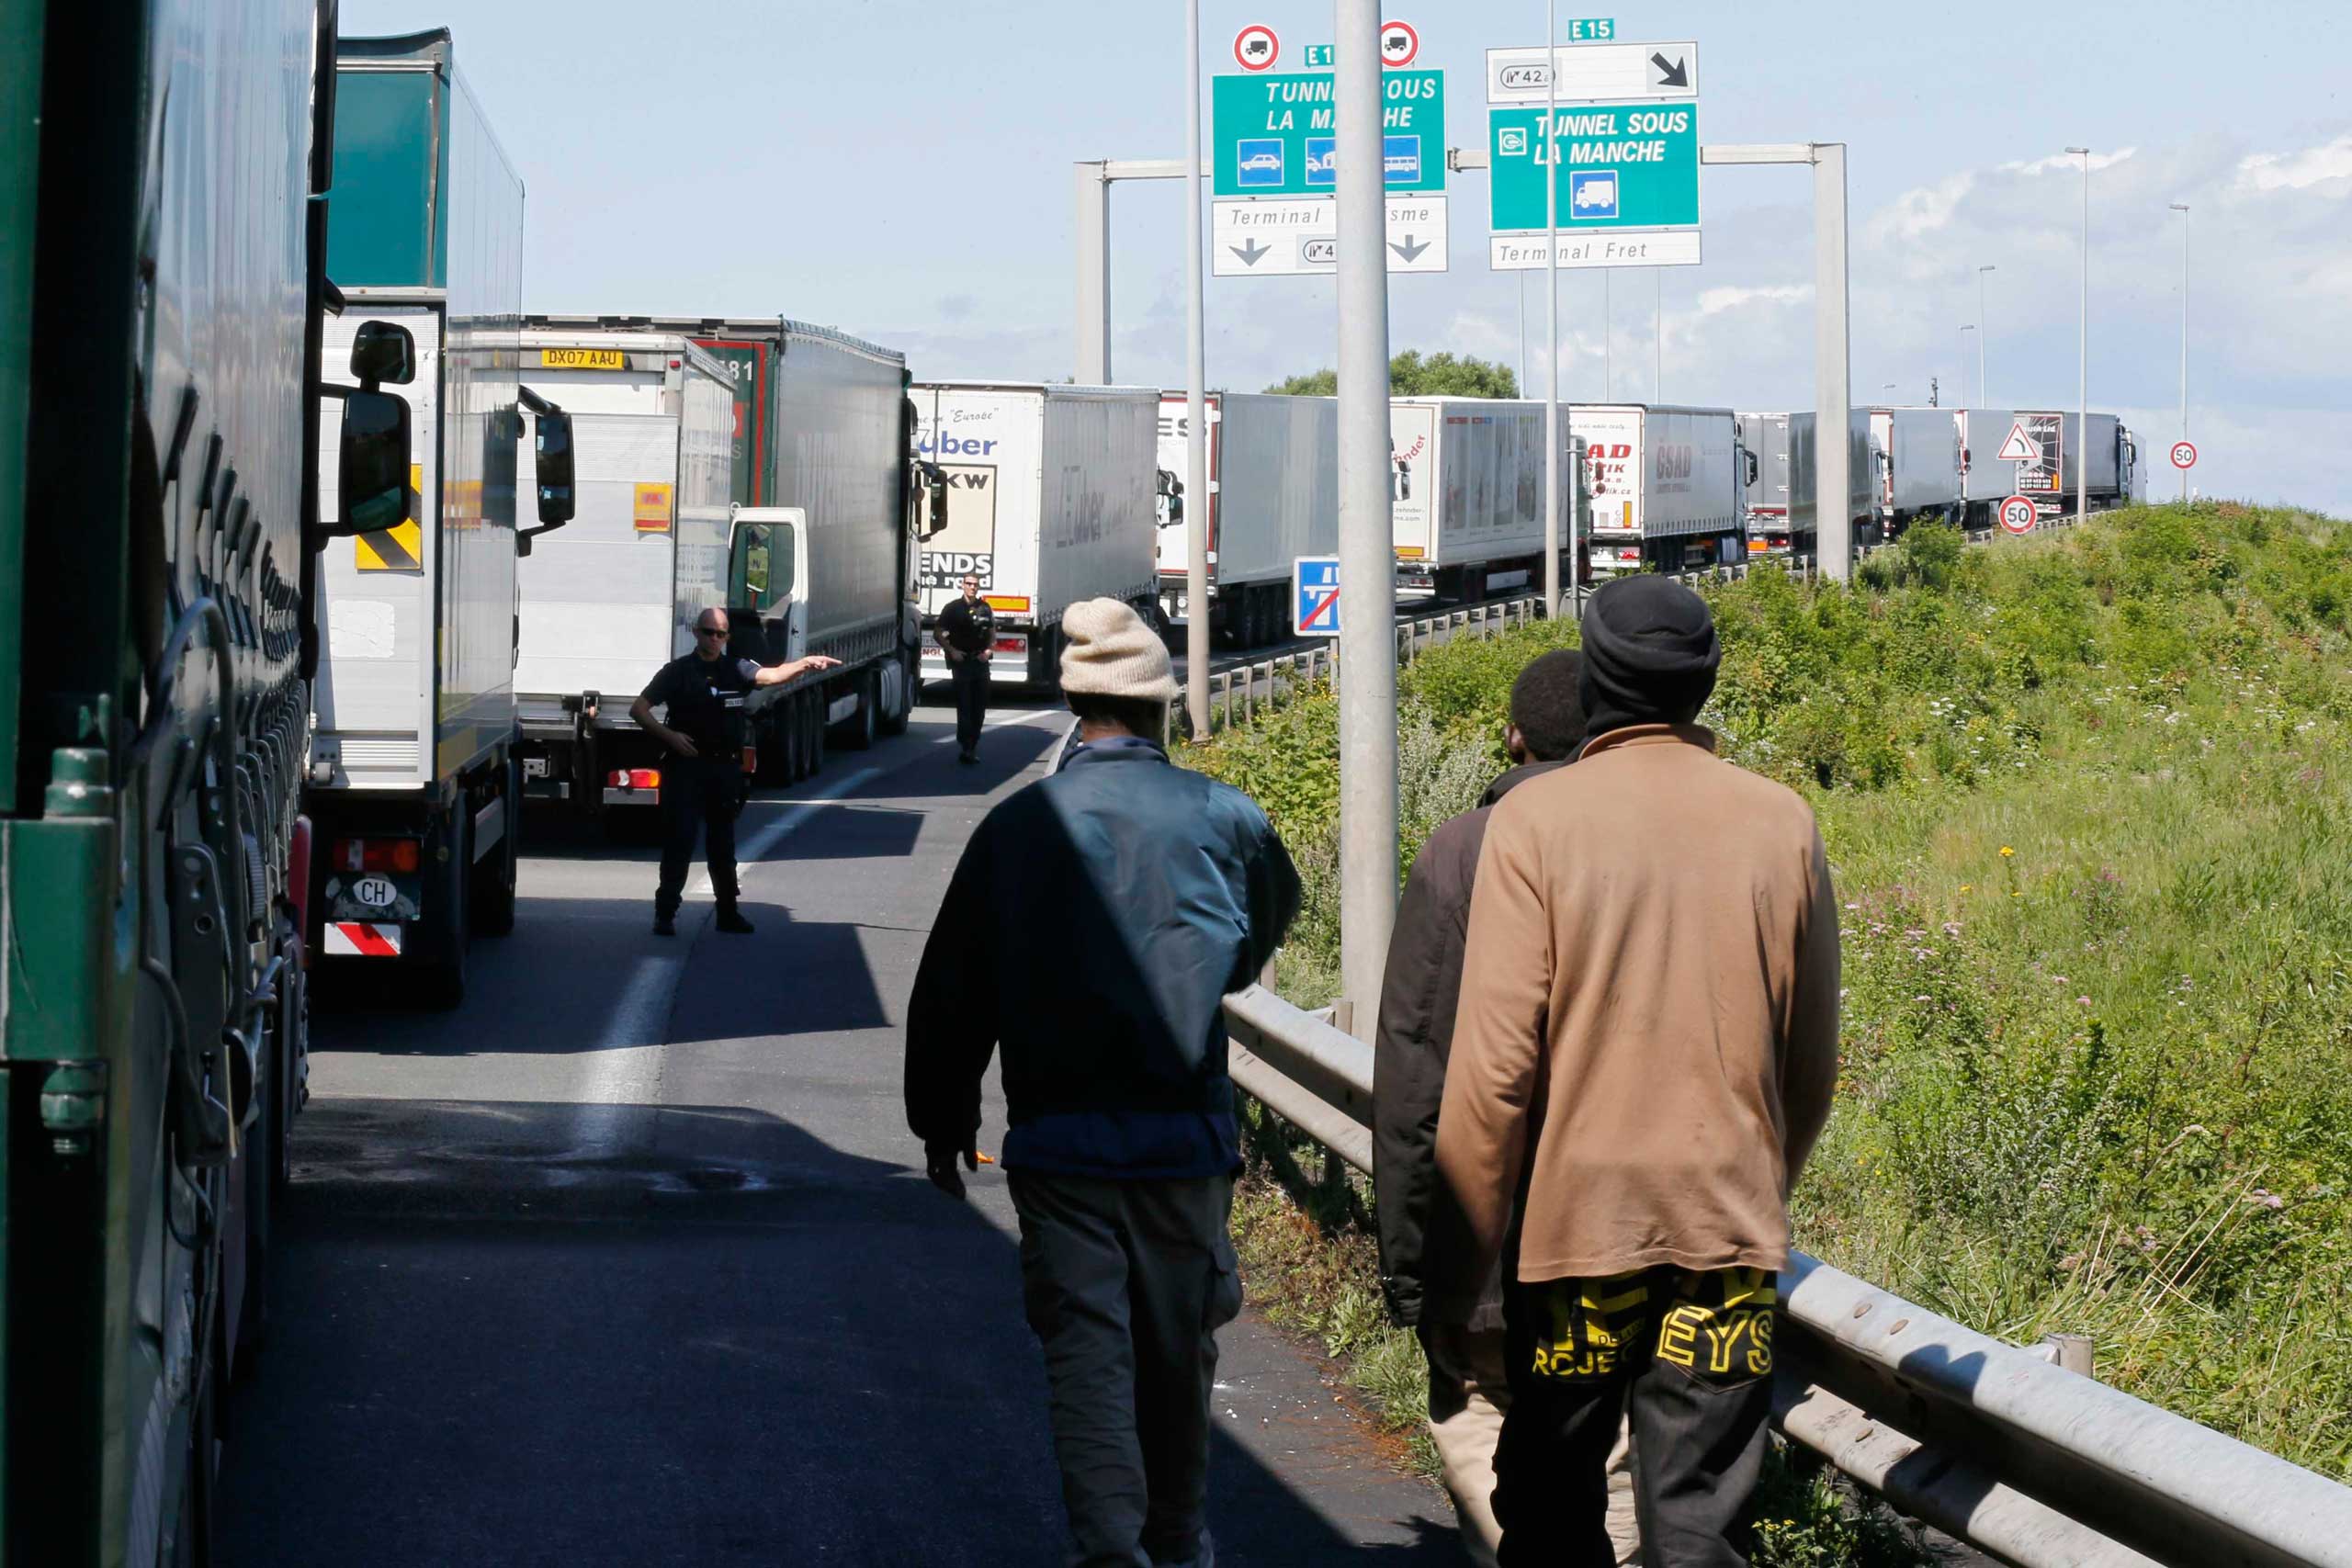 A French policeman signals to migrants to leave the road as lorries queue in Calais on July 29, 2015.